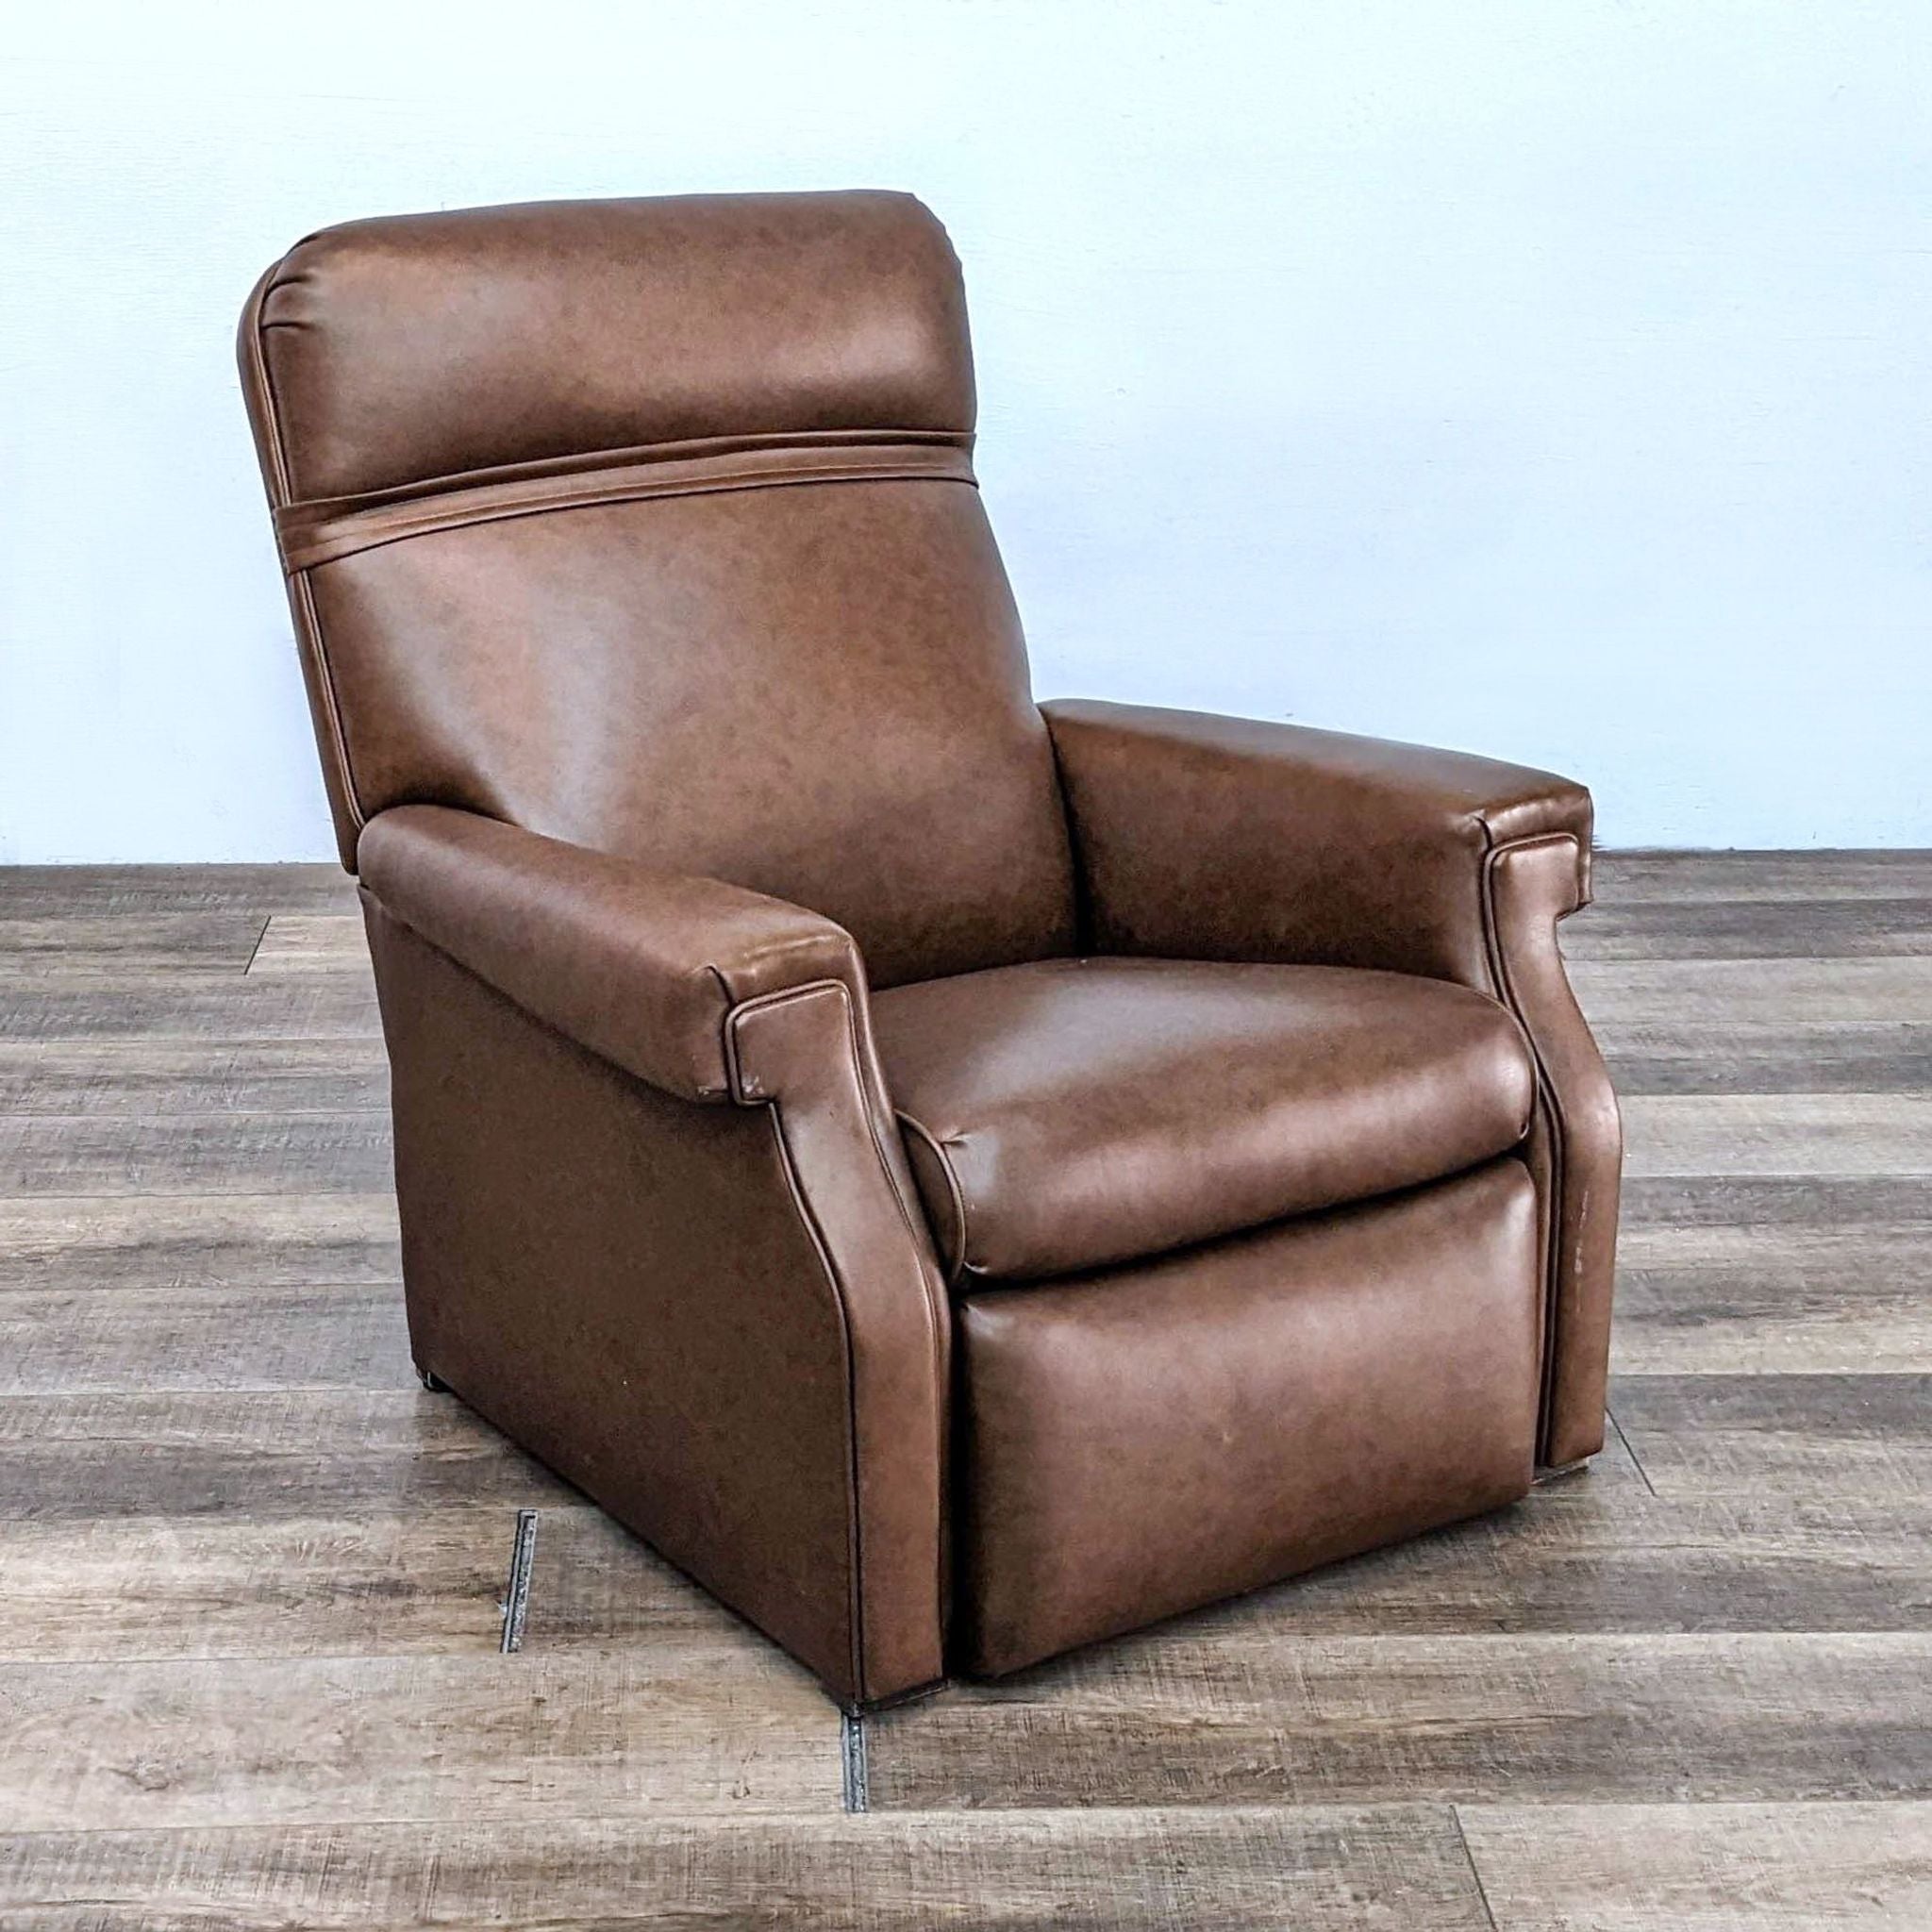 Reperch transitional brown leather recliner with nailhead trim on a wooden floor.